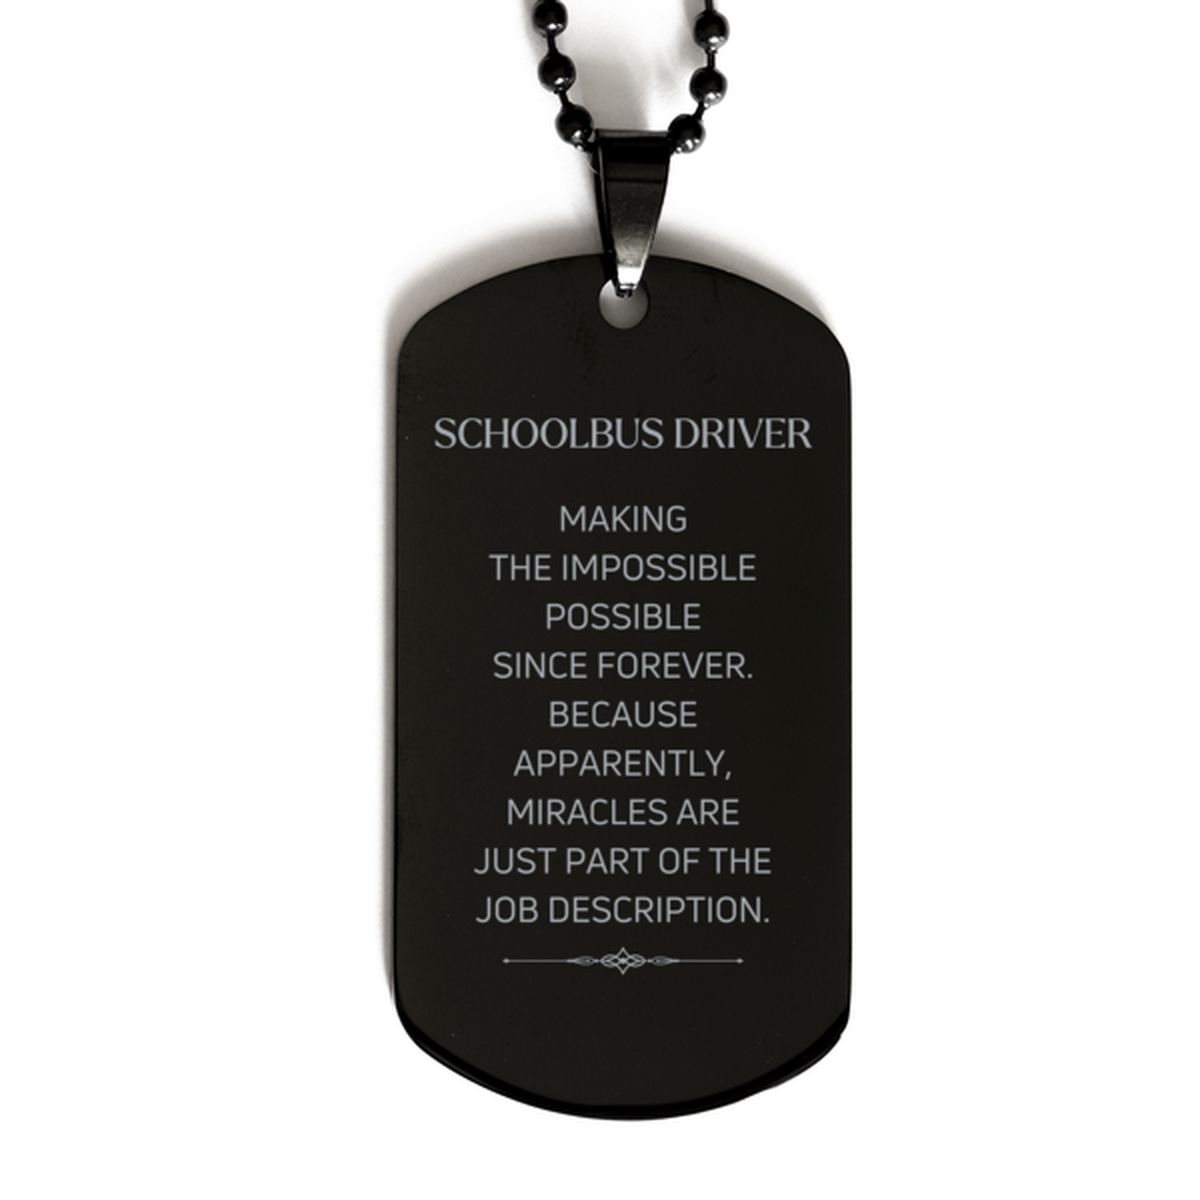 Funny Schoolbus Driver Gifts, Miracles are just part of the job description, Inspirational Birthday Black Dog Tag For Schoolbus Driver, Men, Women, Coworkers, Friends, Boss